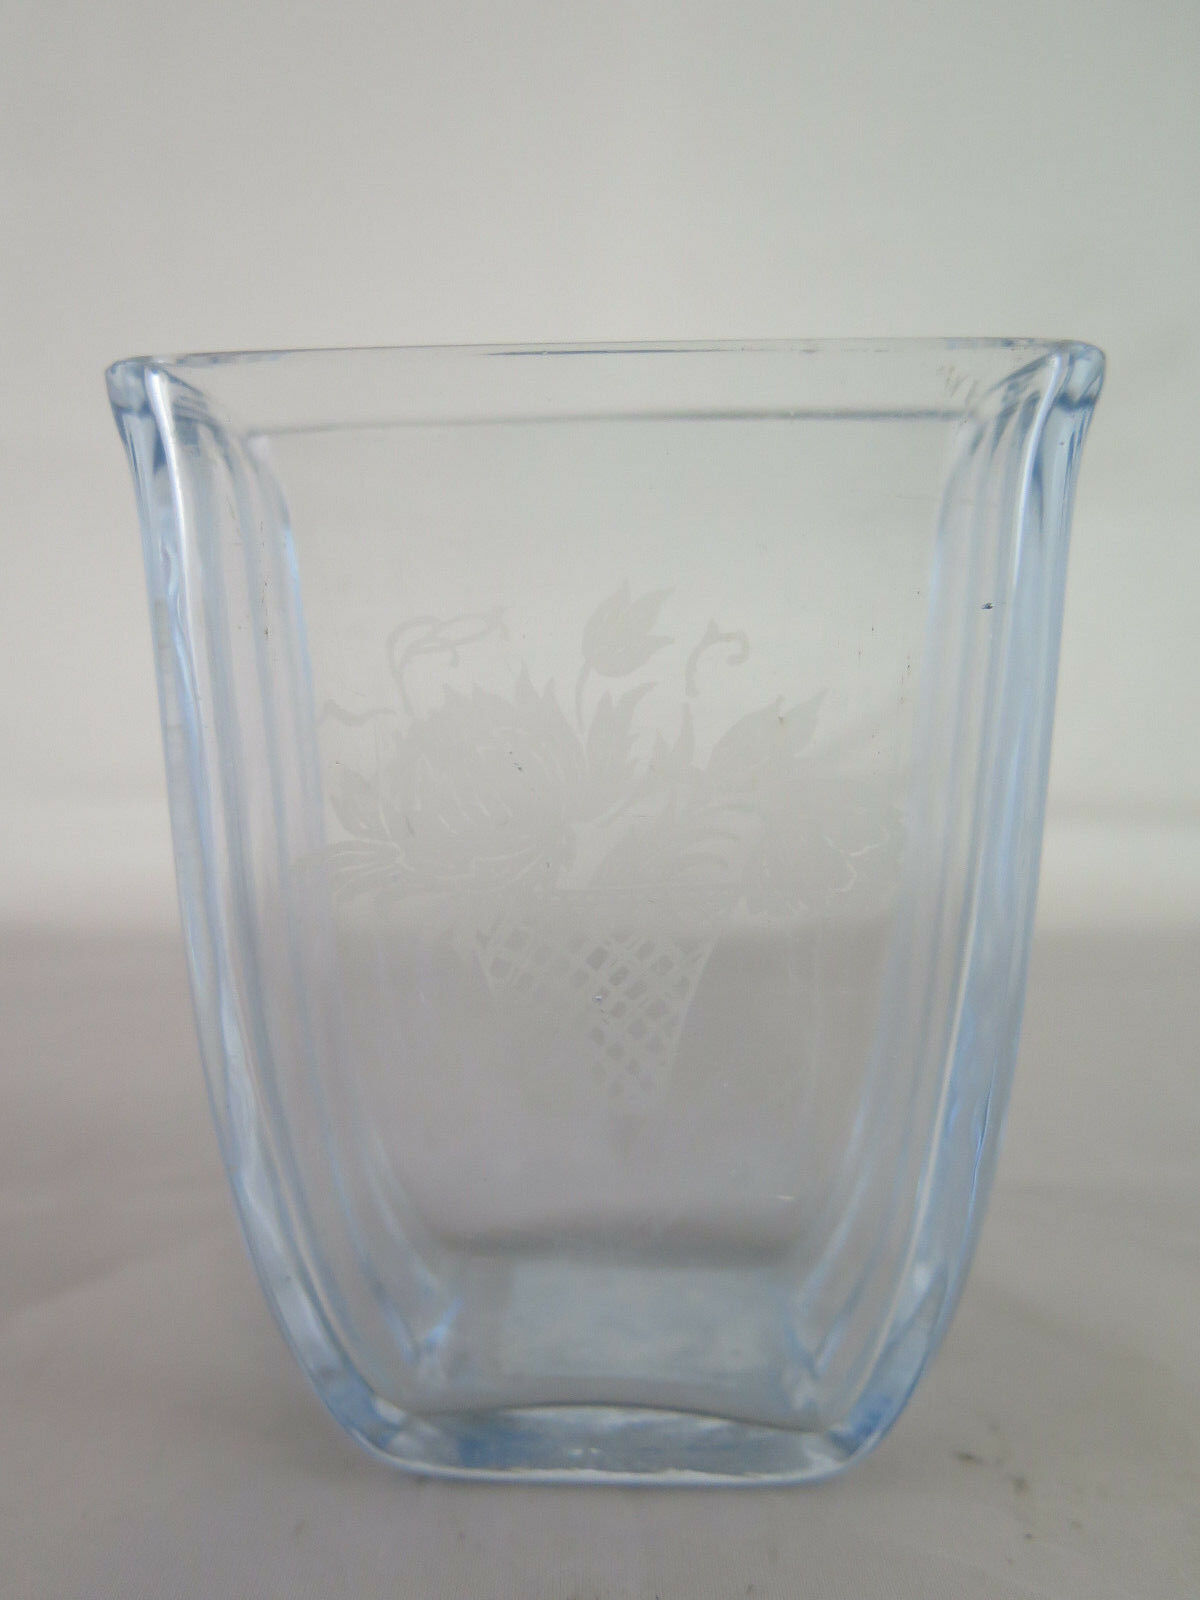 SMALL ANTIQUE GLASS VASE MID 20TH CENTURY VINTAGE CENTERPIECE CUP 1900 R54